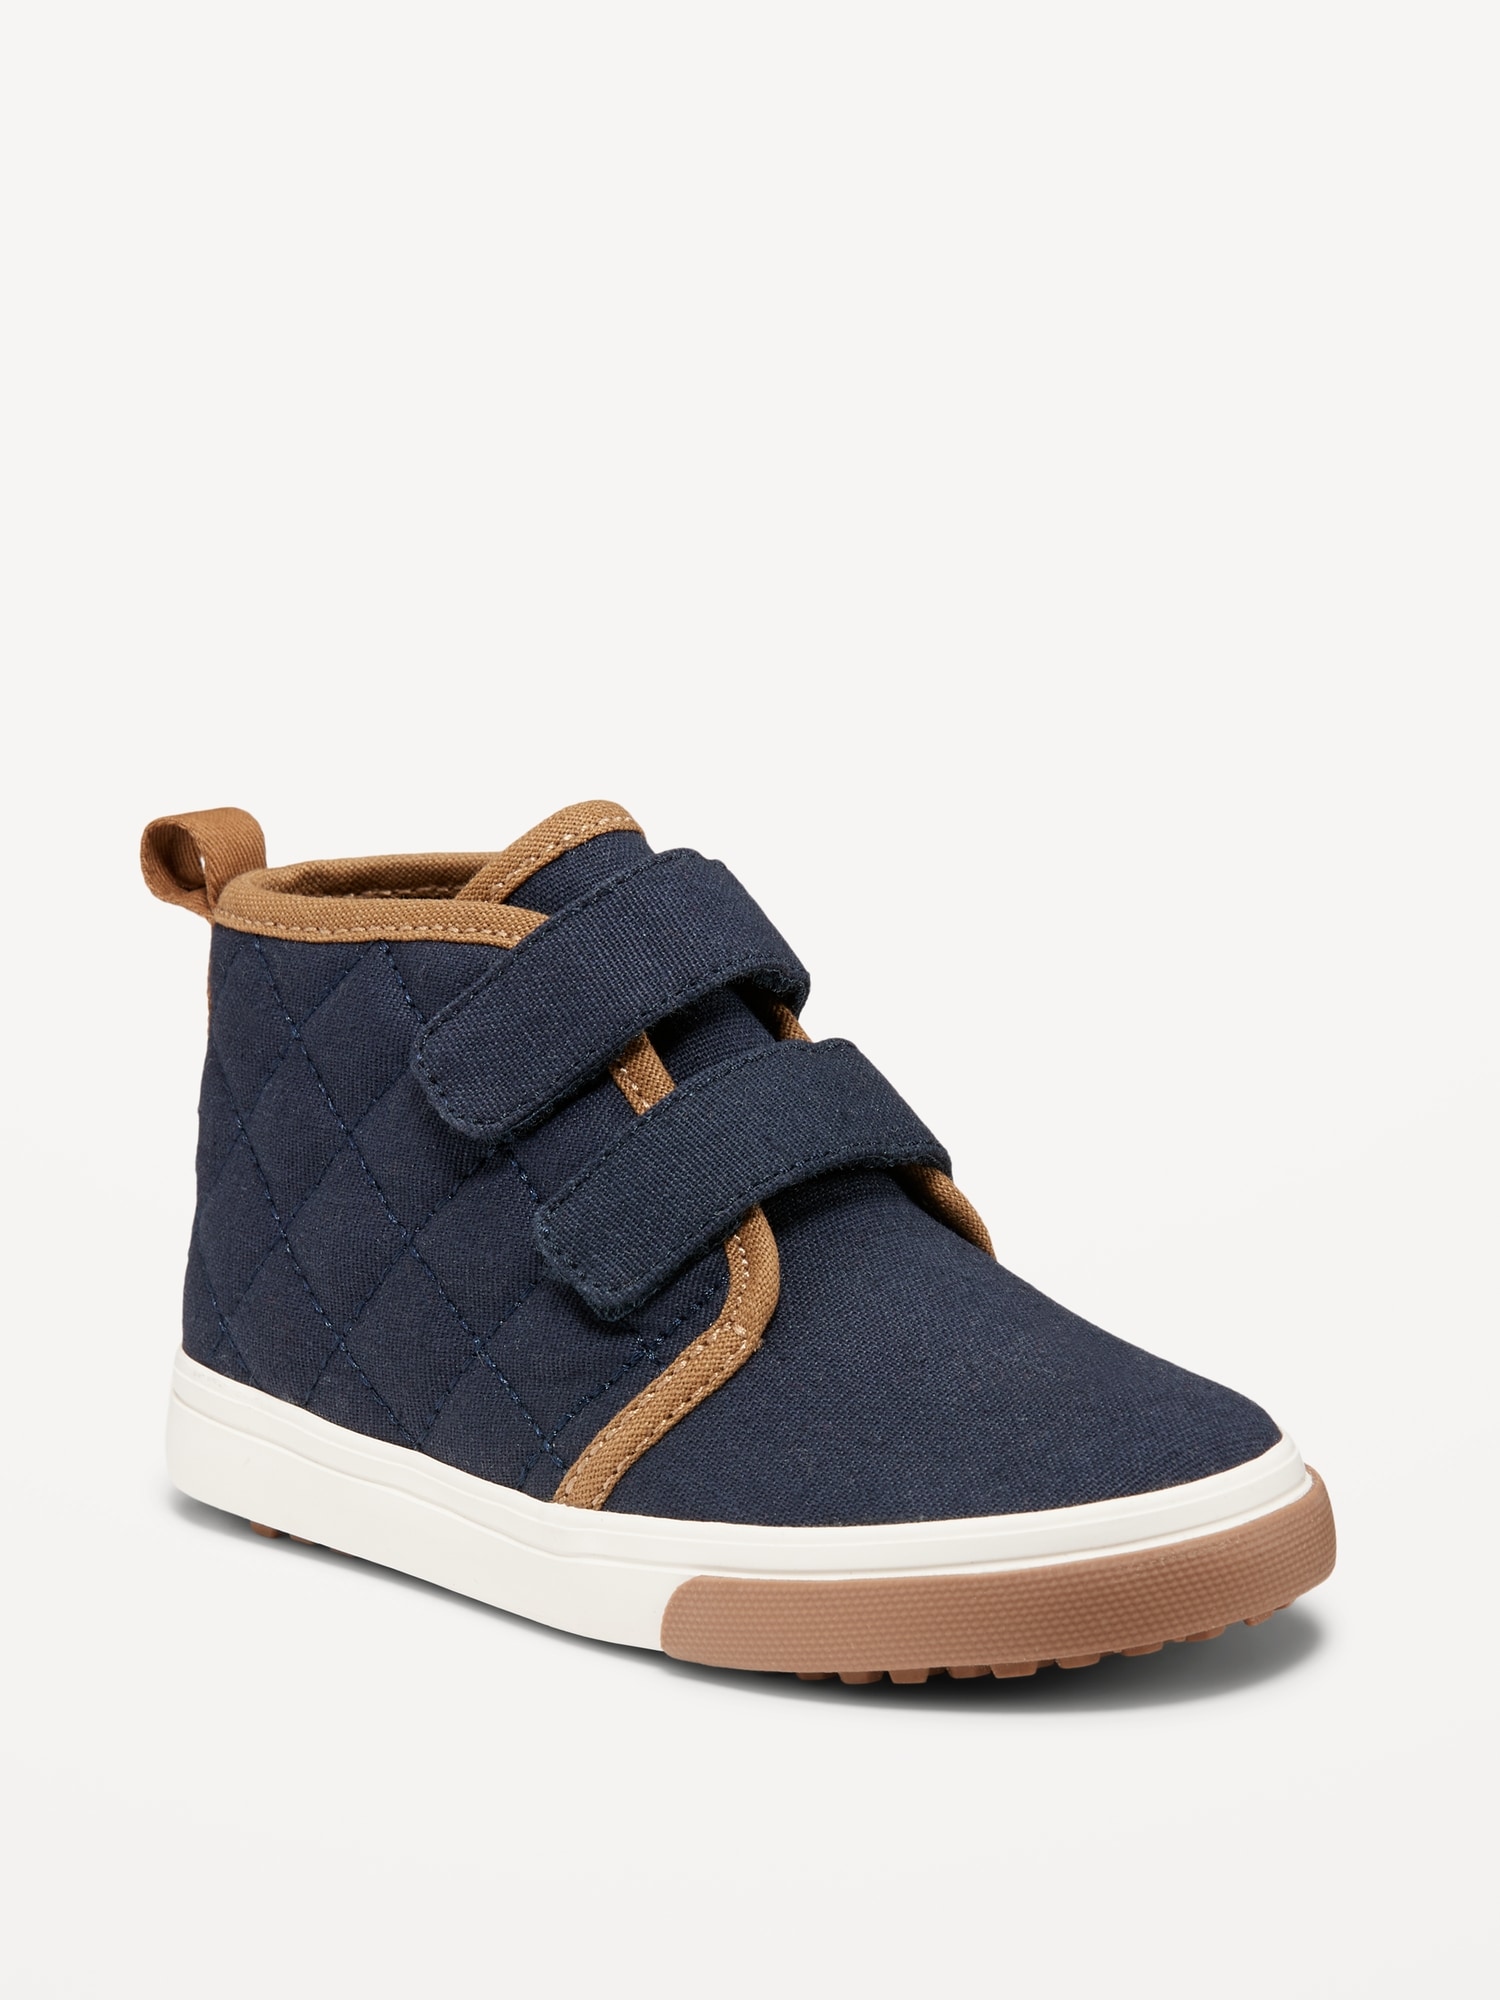 Oldnavy High-Top Quilted Canvas Double-Strap Sneakers for Toddler Boys